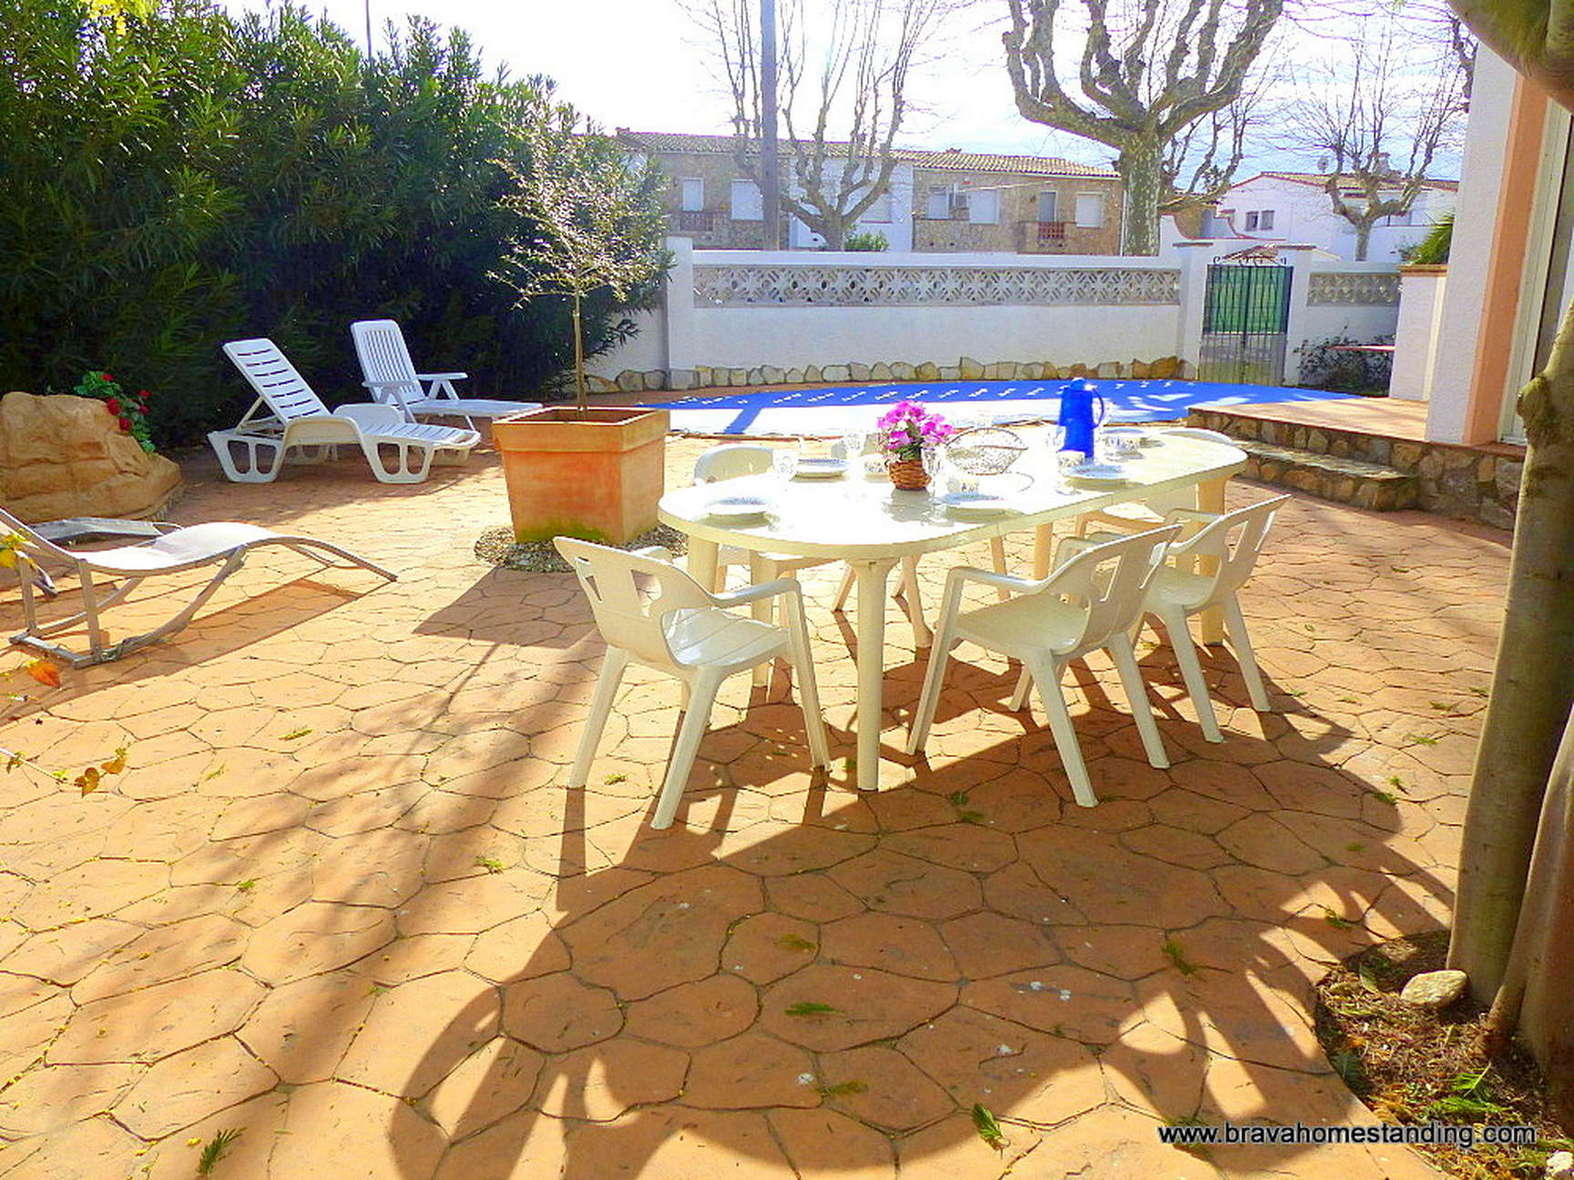 SUPERB VILLA WITH POOL FOR SALE IN EMPURIABRAVA